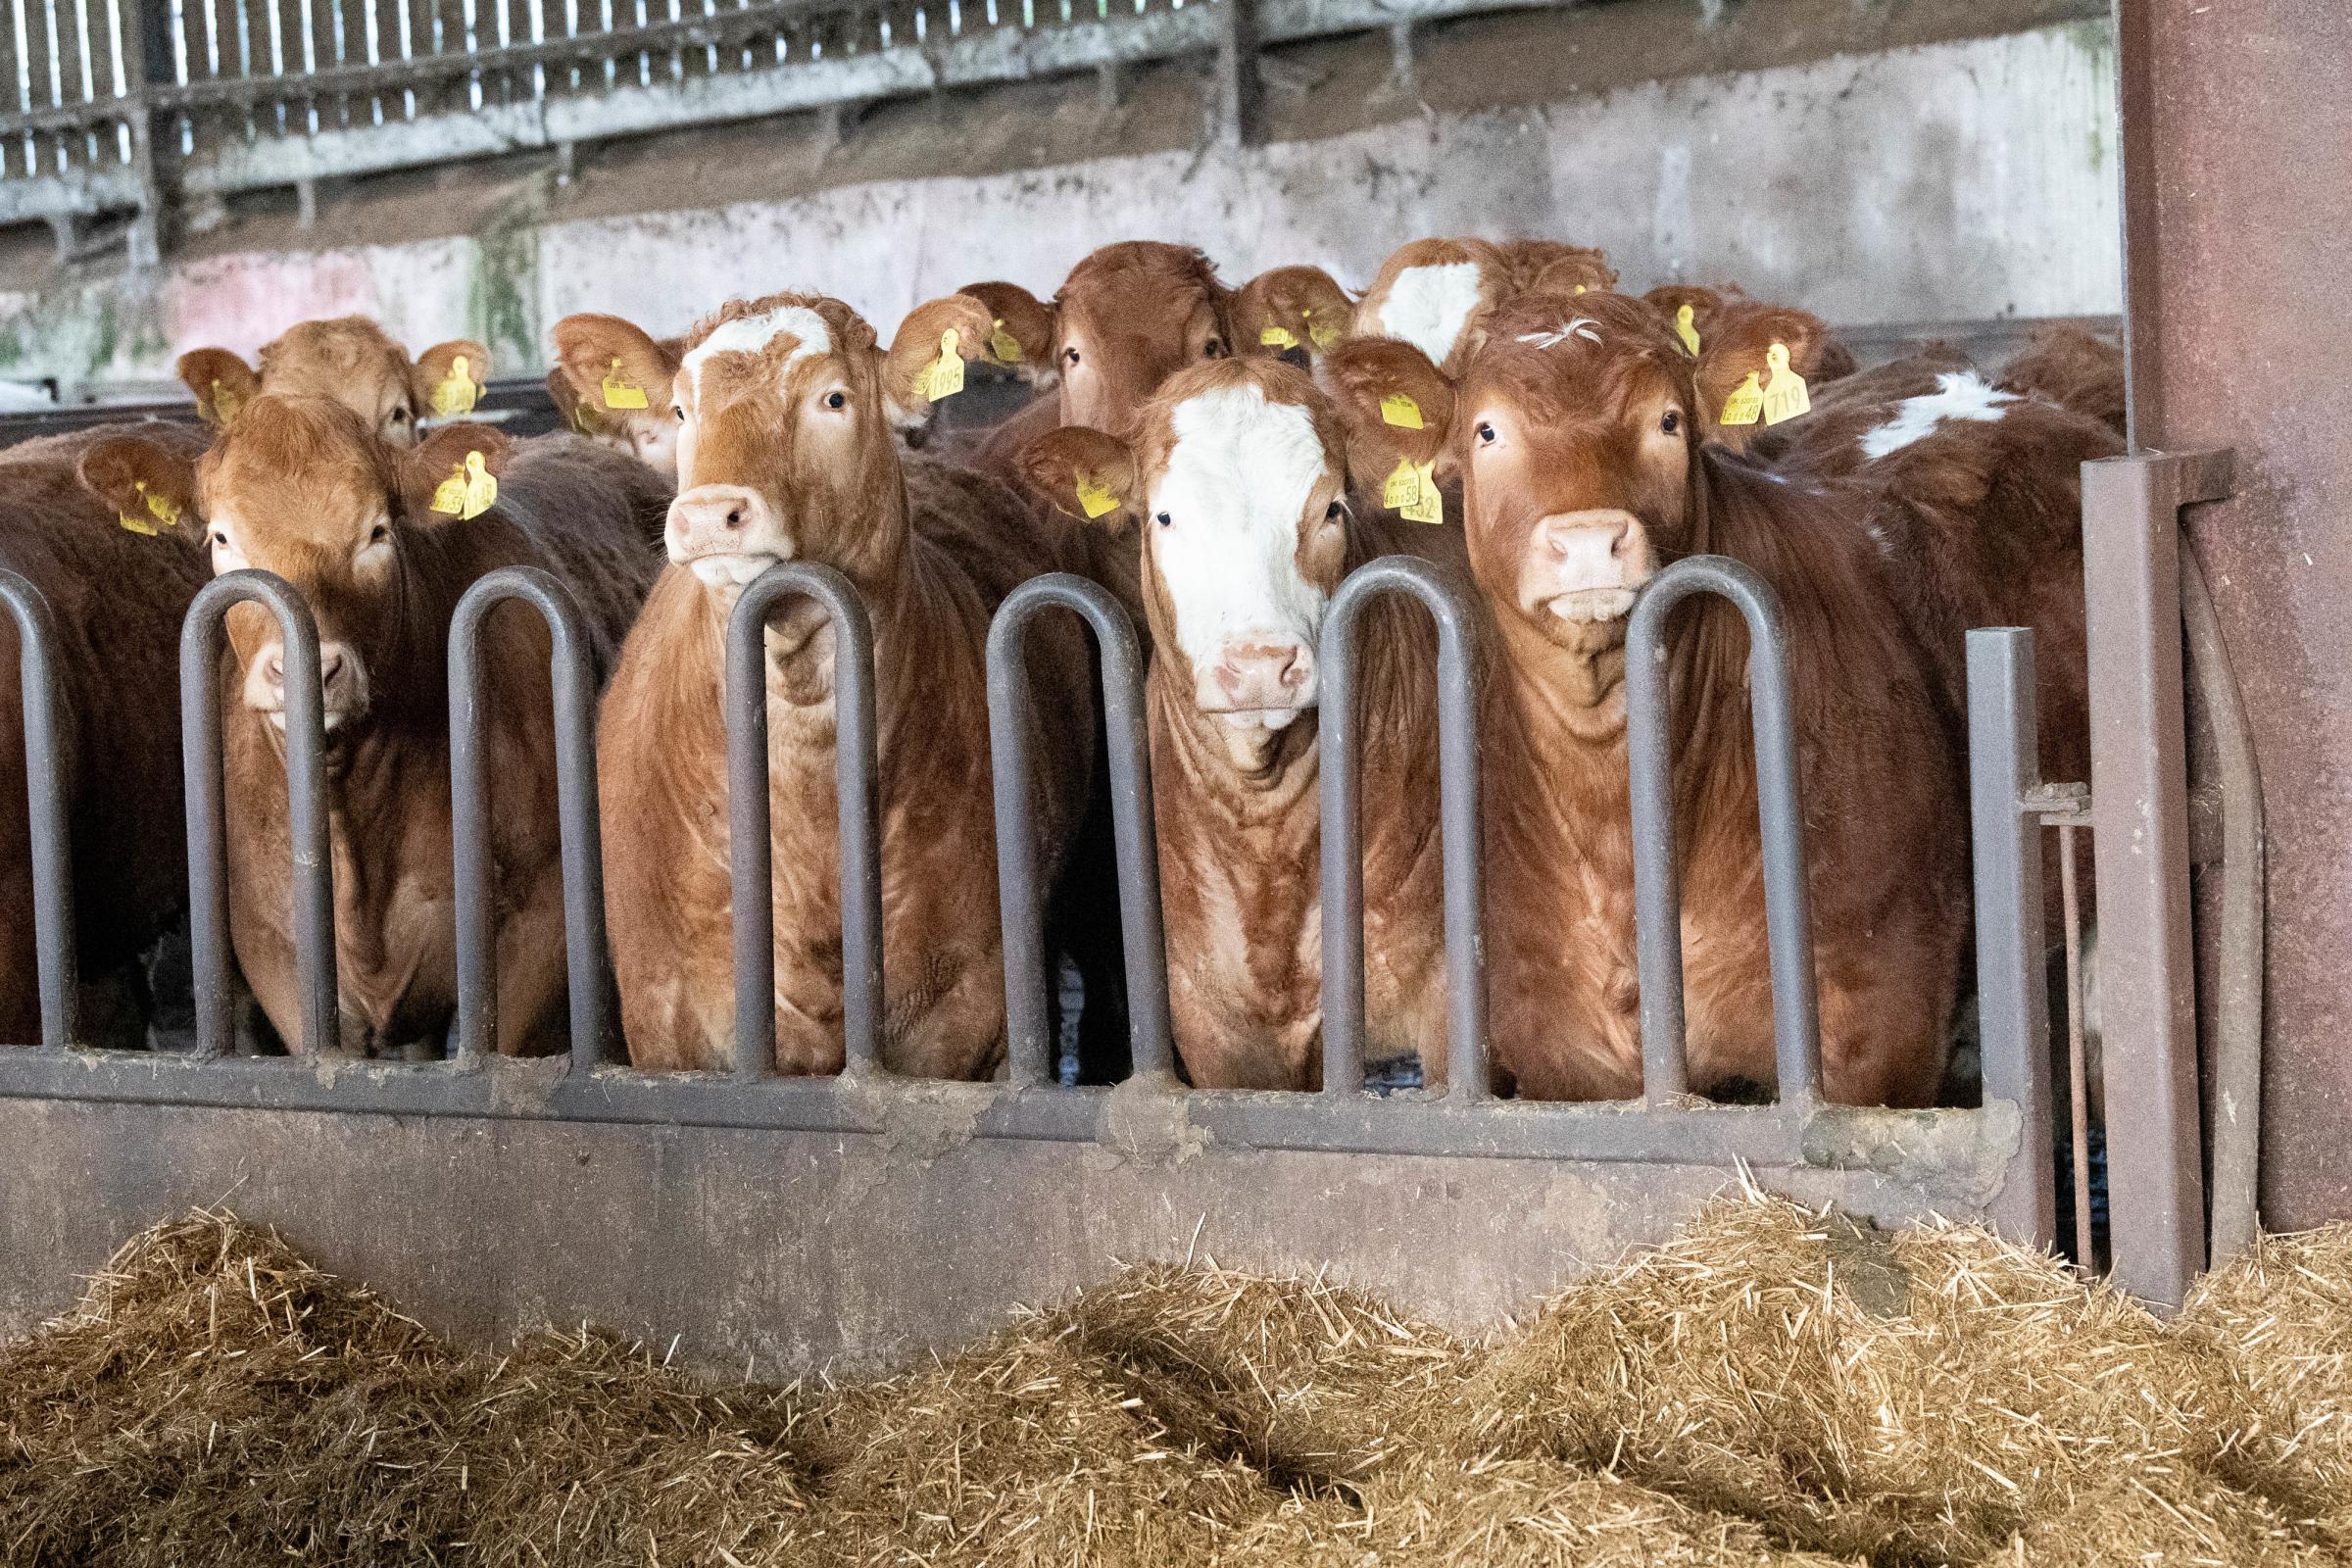 last years spring born calves, which go initially onto slats, receive a silage-based diet, with barley mix, minerals, pot ale syrup and straw for roughage Ref:RH170521156 Rob Haining / The Scottish Farmer...